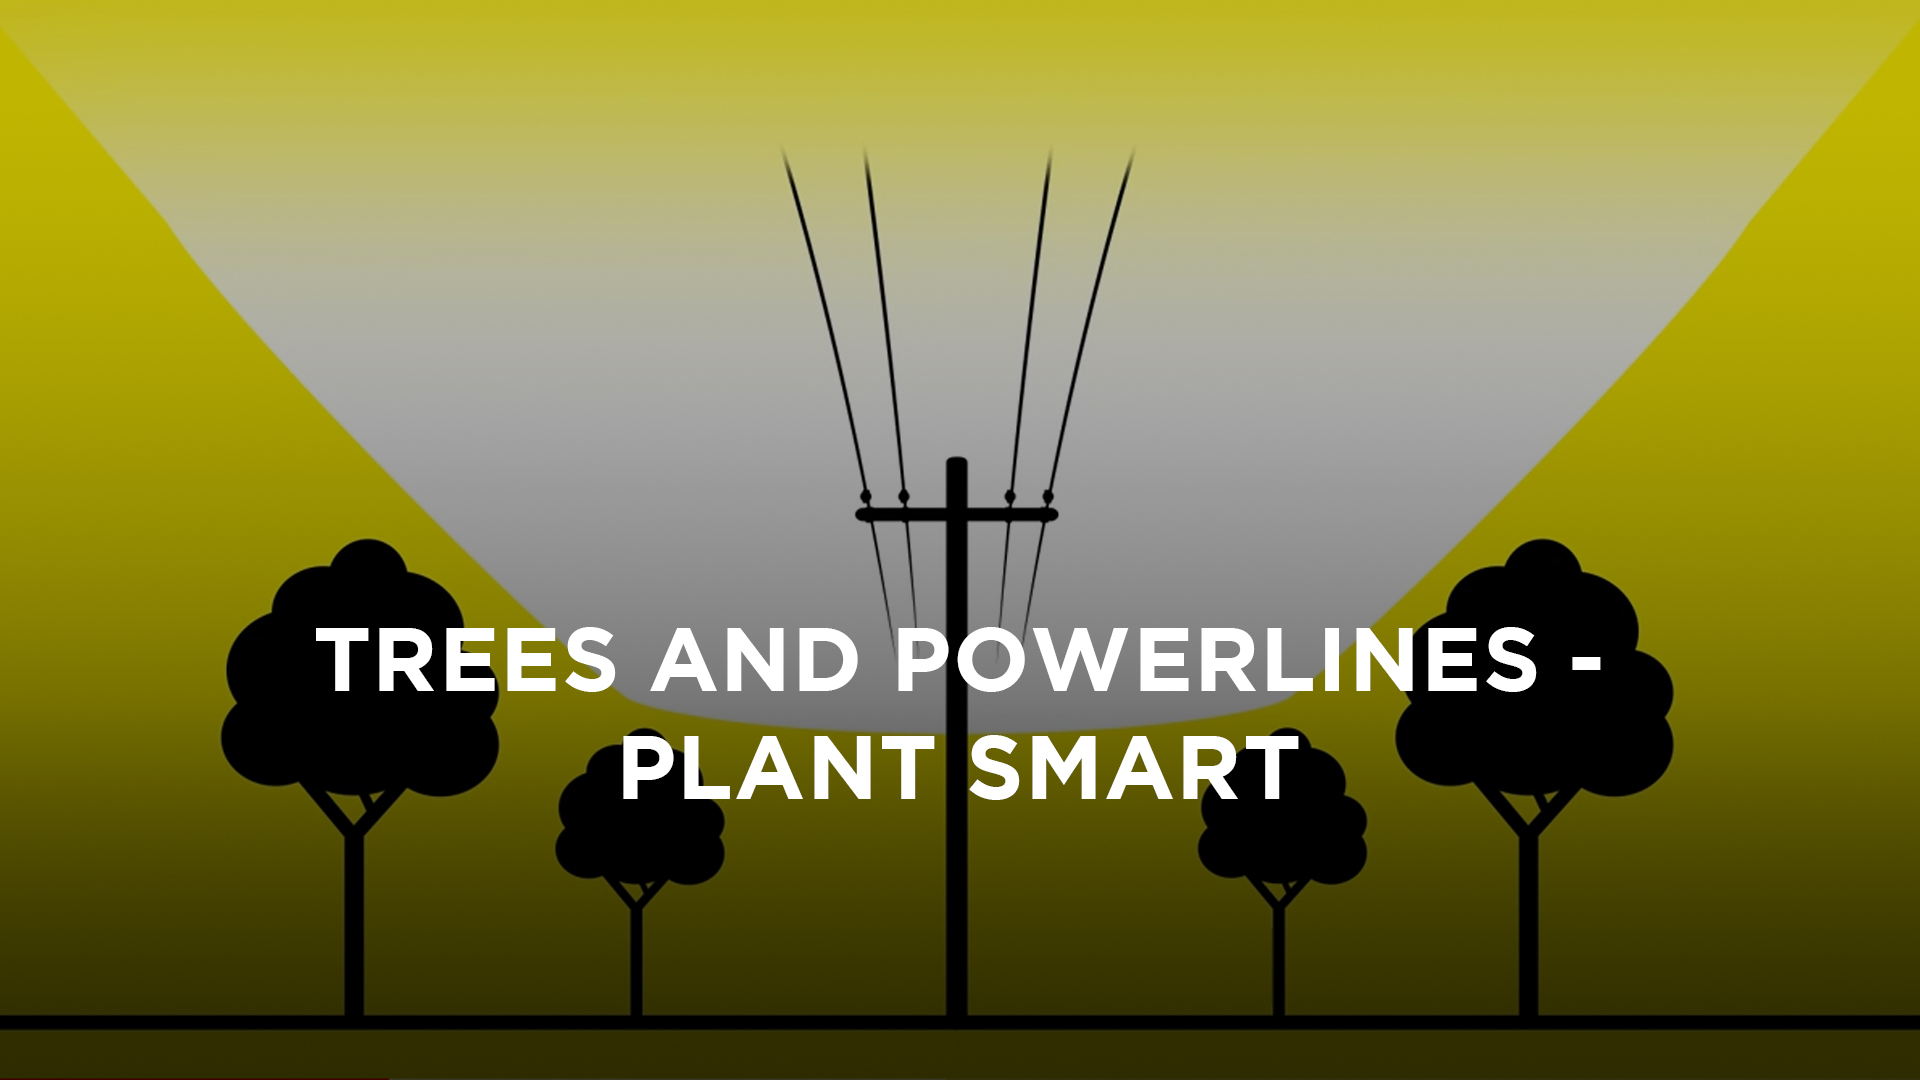 Cartoon trees near powerlines with wording of trees and powerlines - plant smart